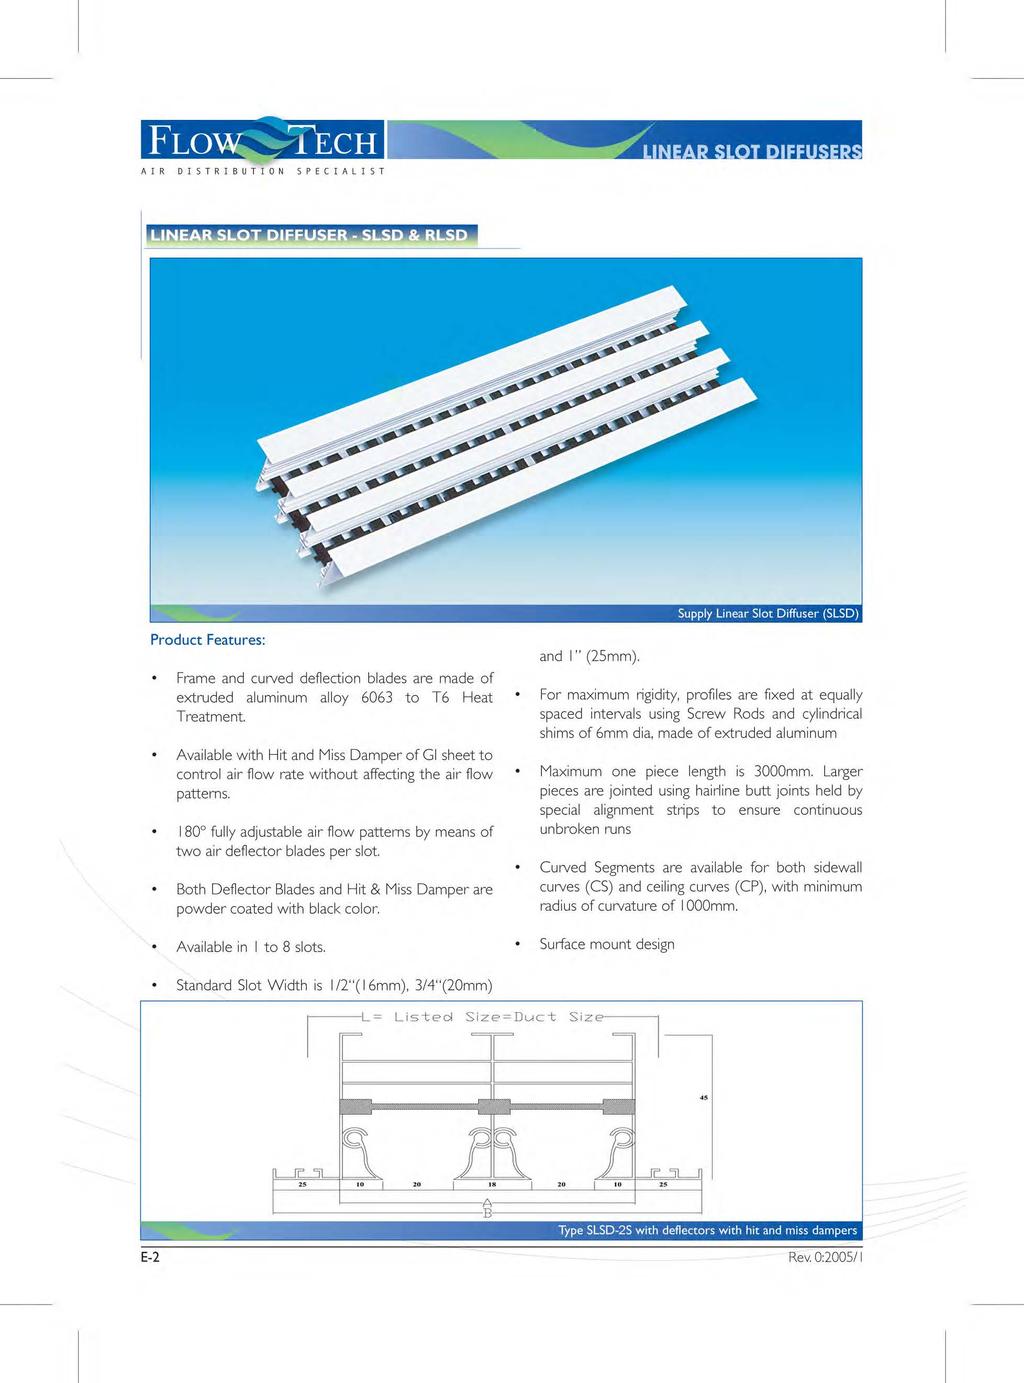 FLOW ~TECH AI R DISTRIBUTION SPECIALIST Supply Linear Slot Diffuser (SLSD) Product Features: Frame and curved deflection blades are made of extruded aluminum alloy 0 to T Heat Treatment.